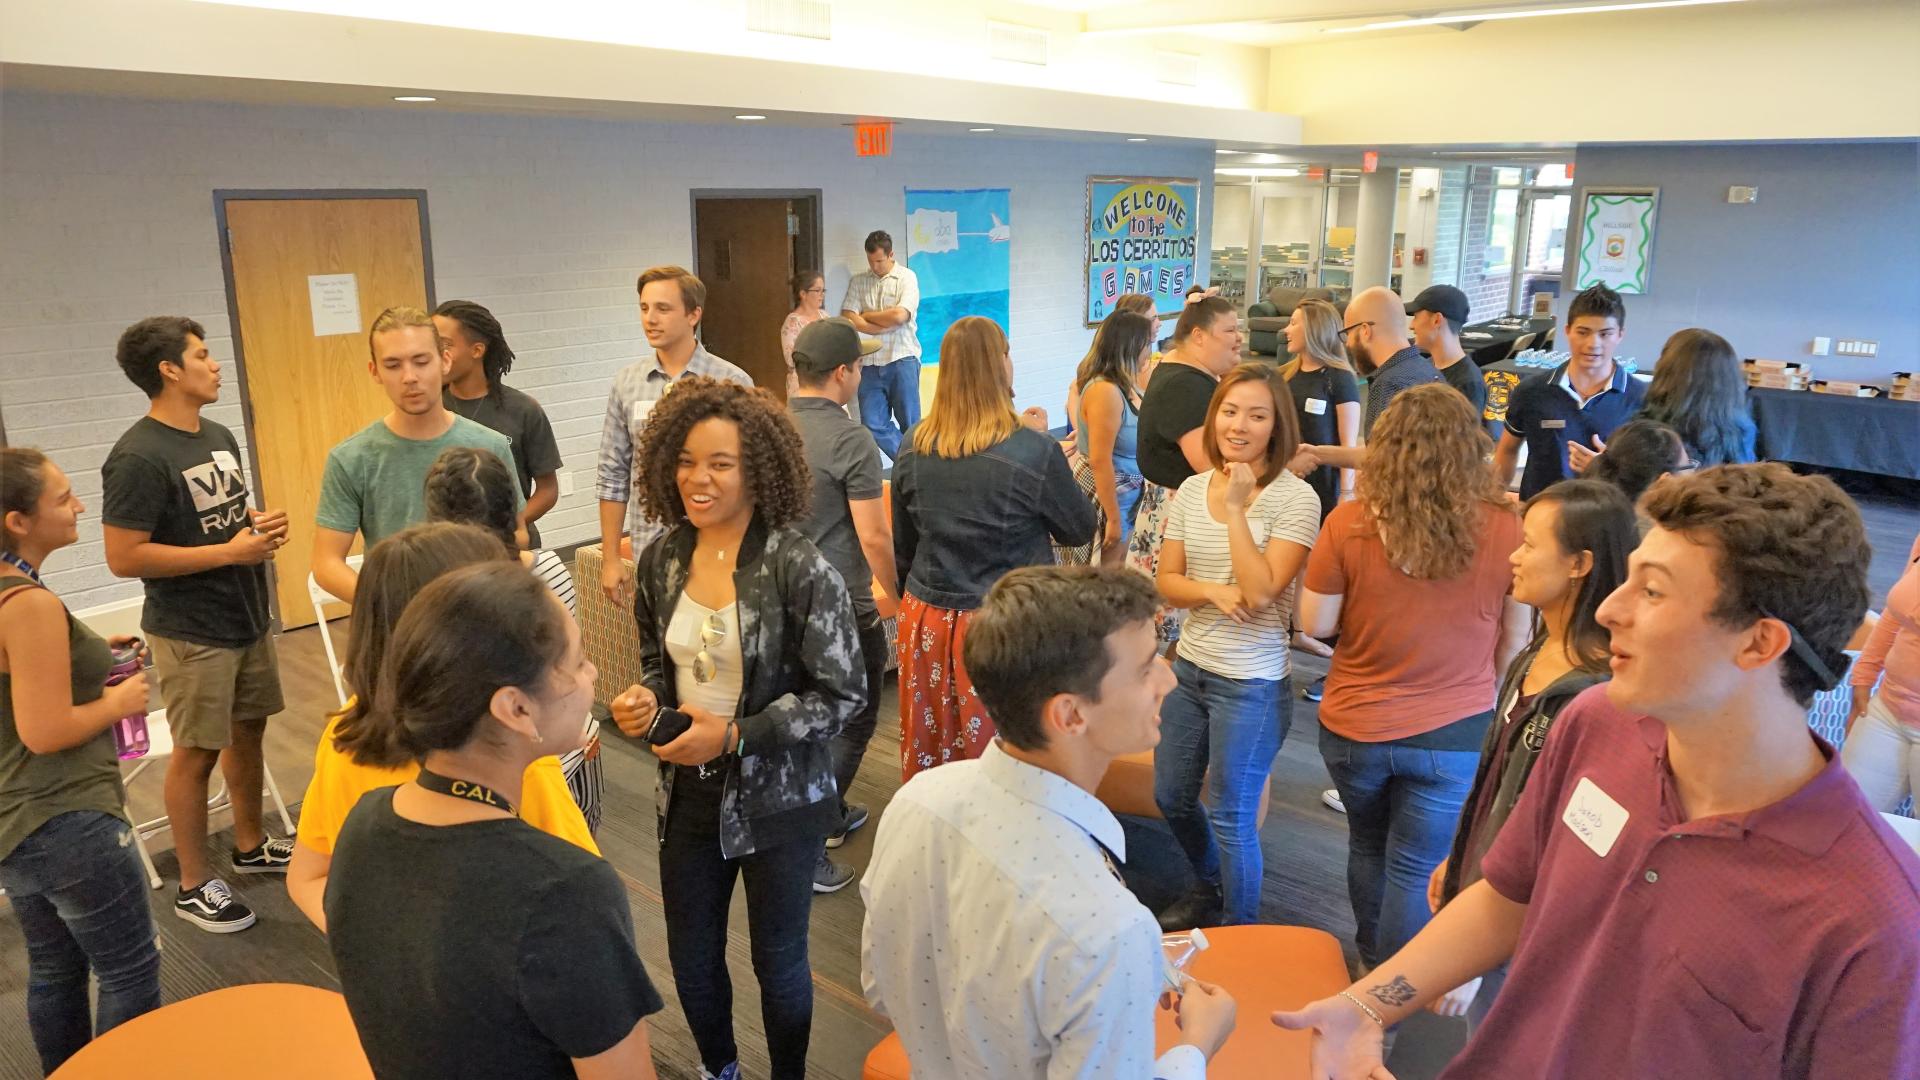 COB Honors Program Meet and Greet 2018 students meeting others